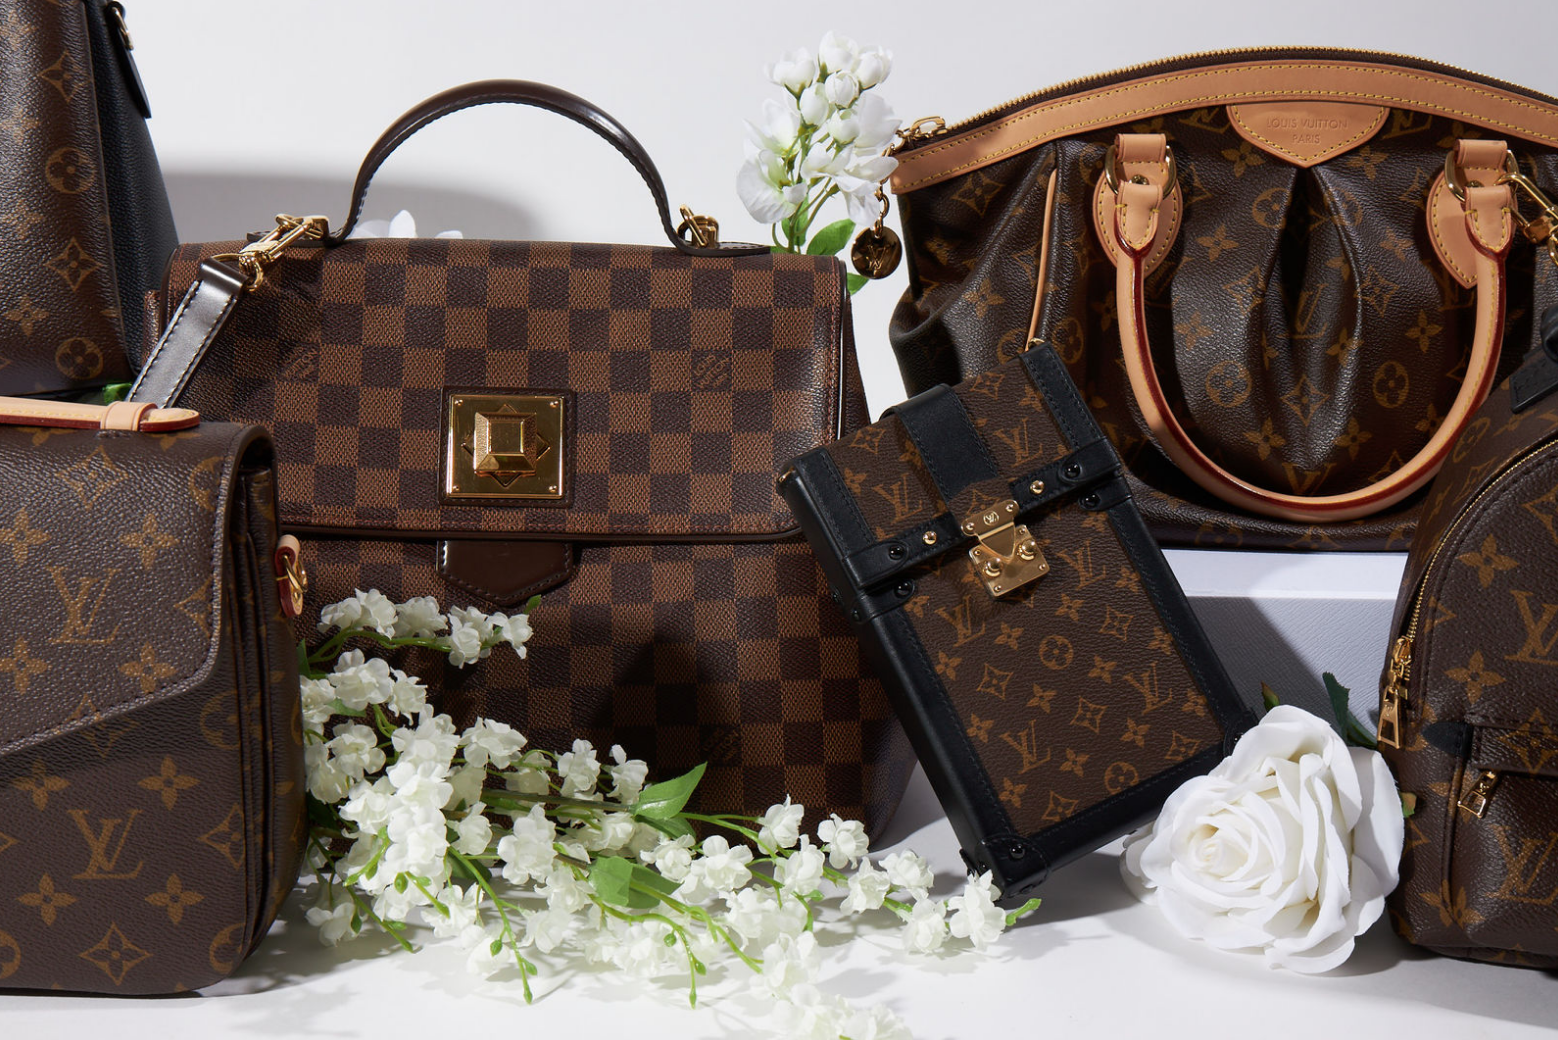 Keeping It Real w/ Luxe Du Jour: Top 3 Risks of Buying Counterfeit Handbags  — The Issue.